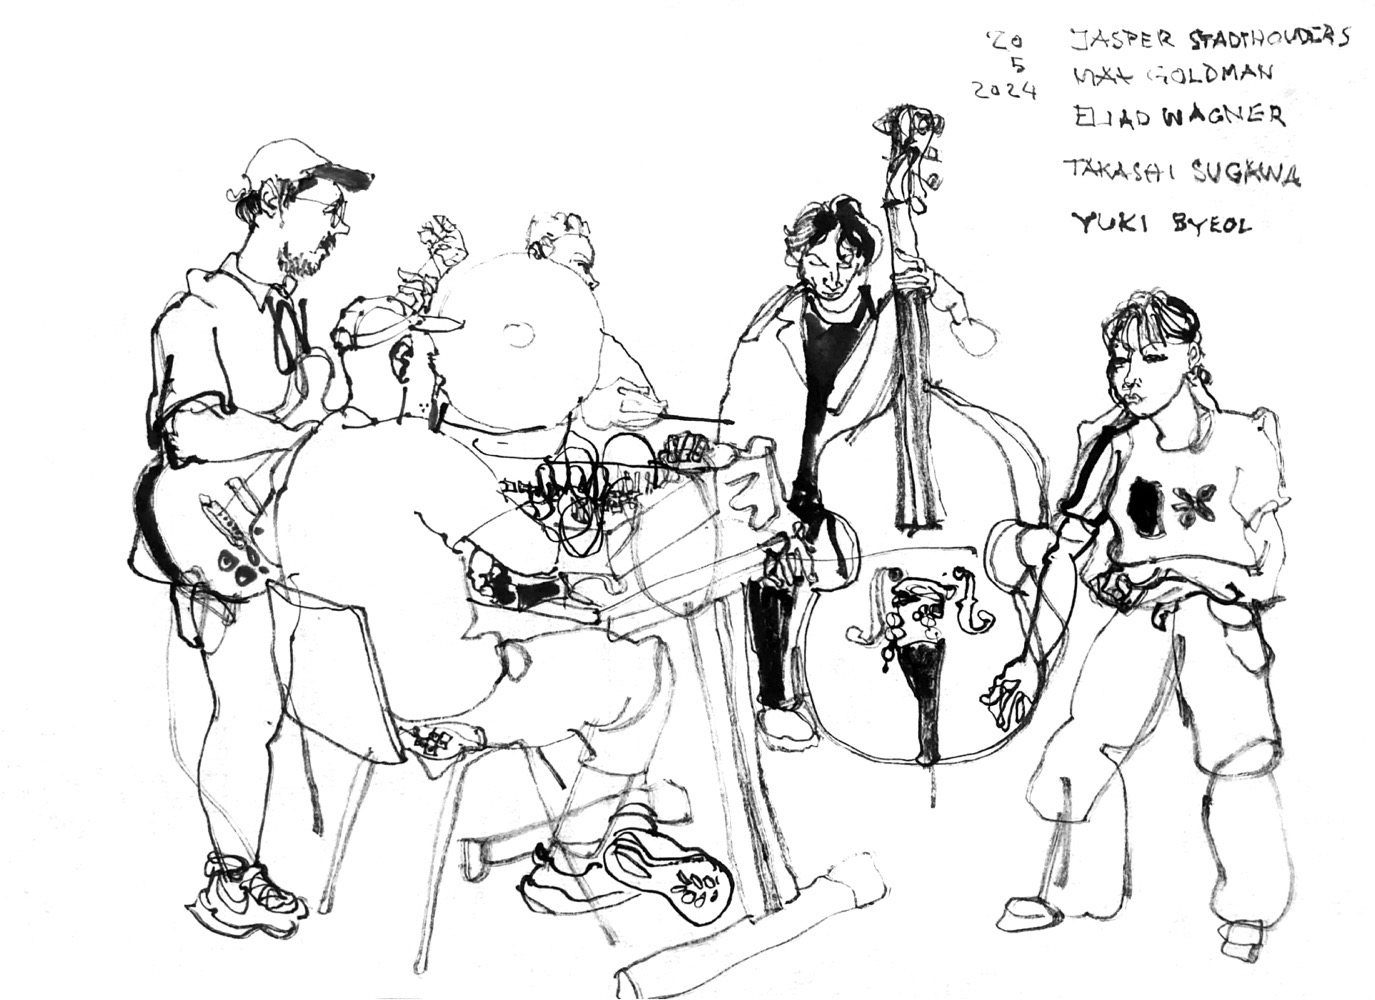 Ink drawing of three musicians and a dancer.